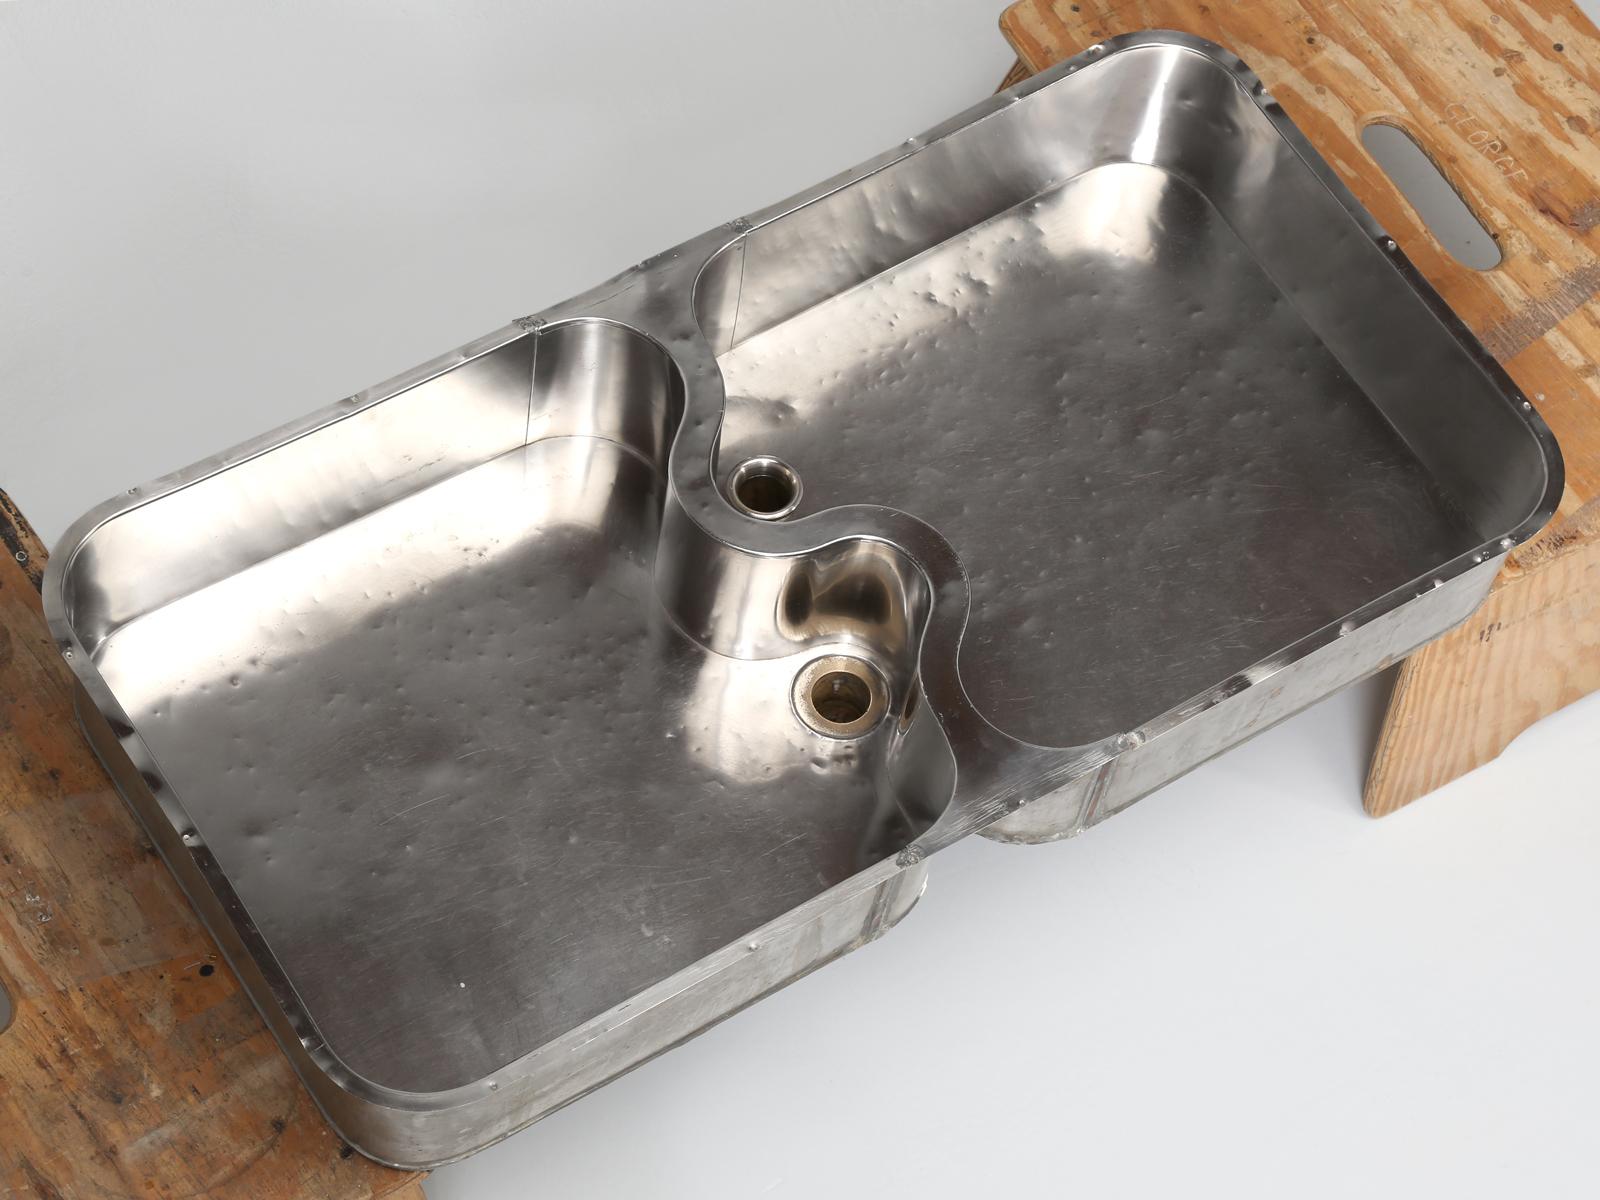 German silver undermount sink, recently removed from an early 1900s house in Chicago and was fully functional, with no leaks or prior repairs. Probably made by Elkay Manufacturing circa 1920 here in Chicago.
Measurements provided do not include the